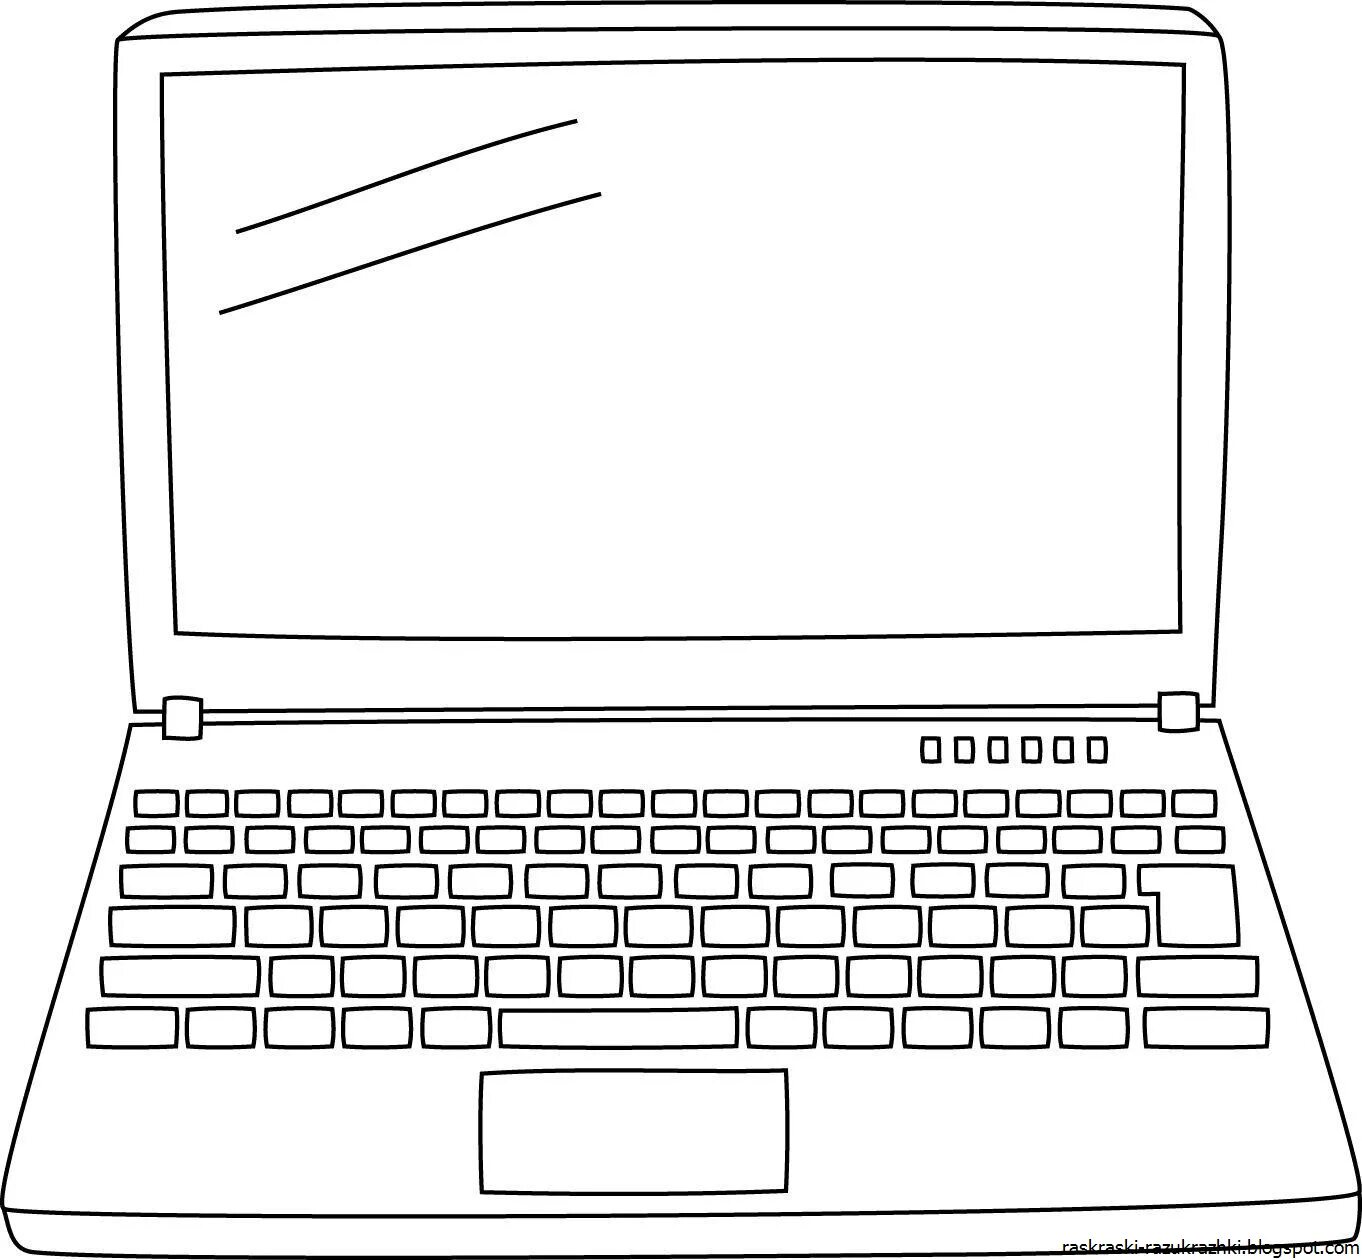 Brilliant computer and phone coloring book